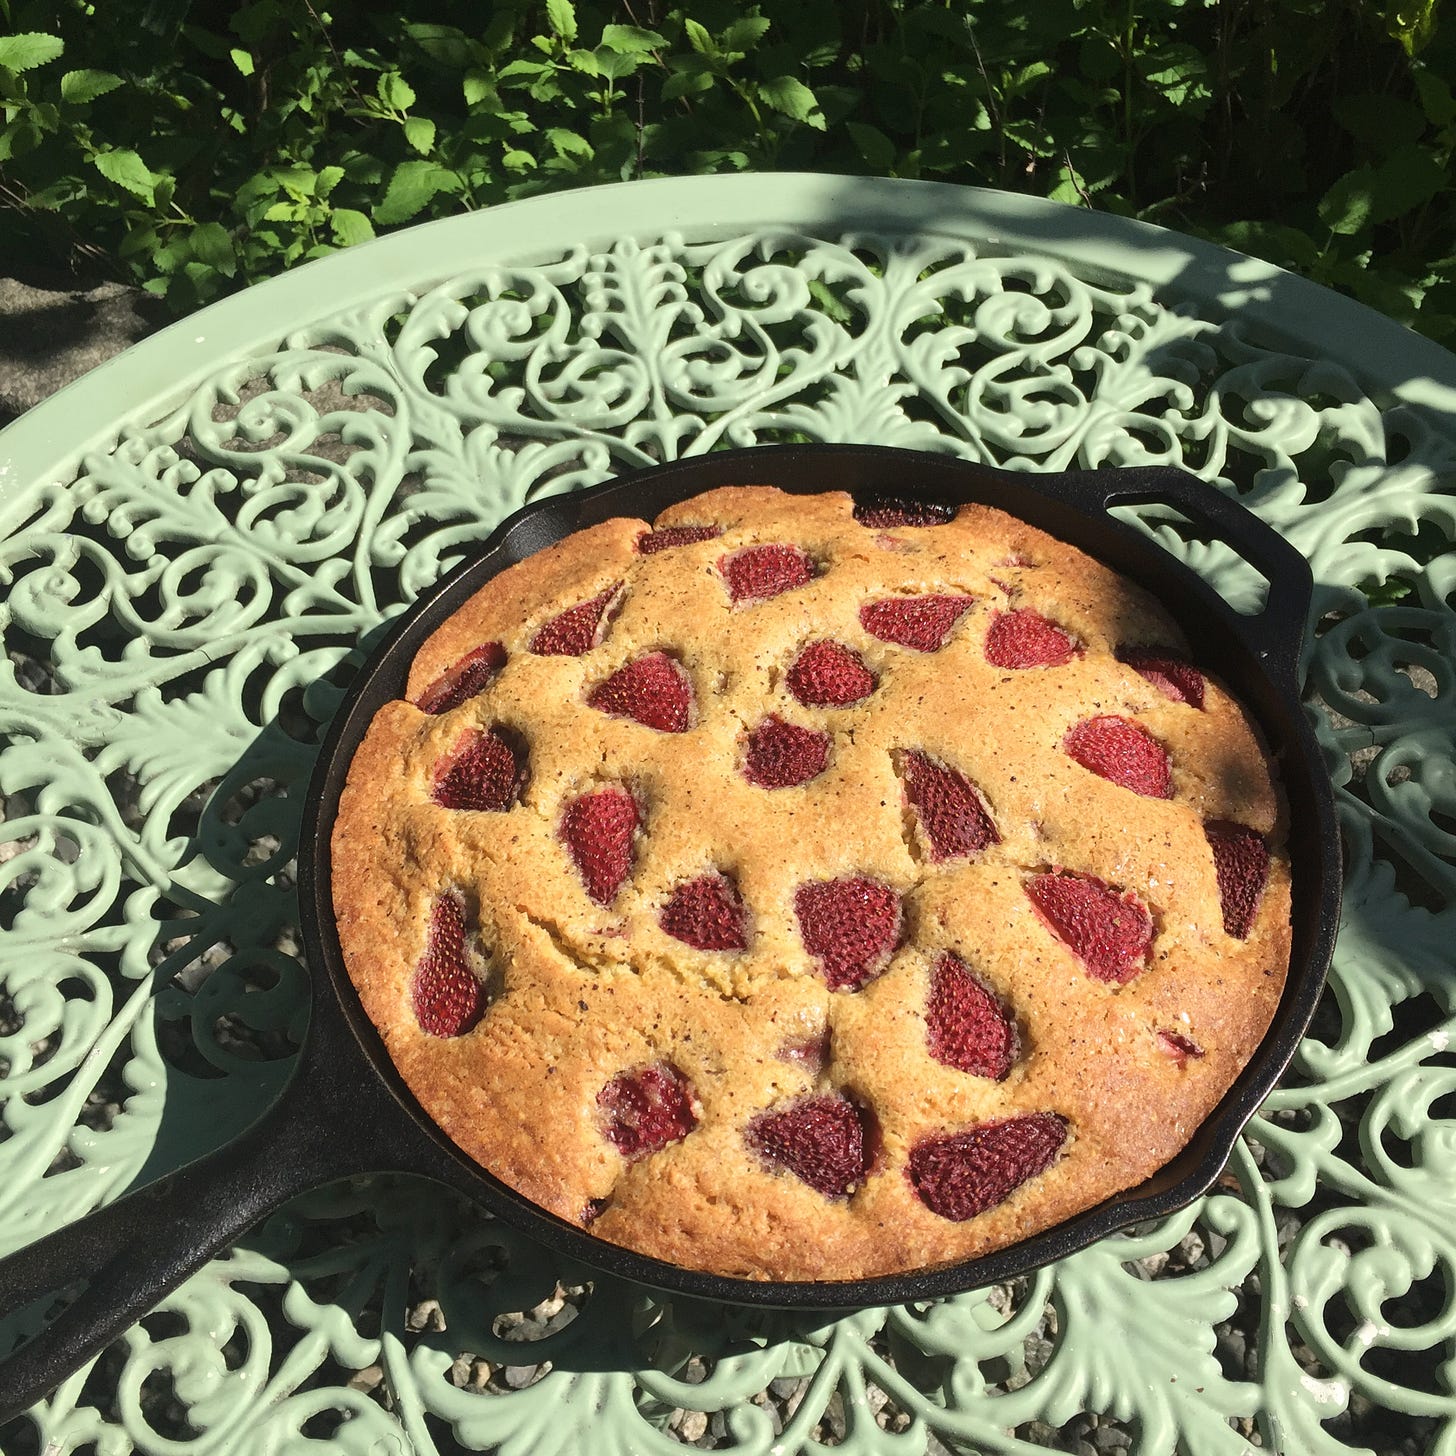 On a mint green outdoor table of wrought iron, a cast iron pan full of a golden-brown cake flecked with strawberry halves rests in the sun.